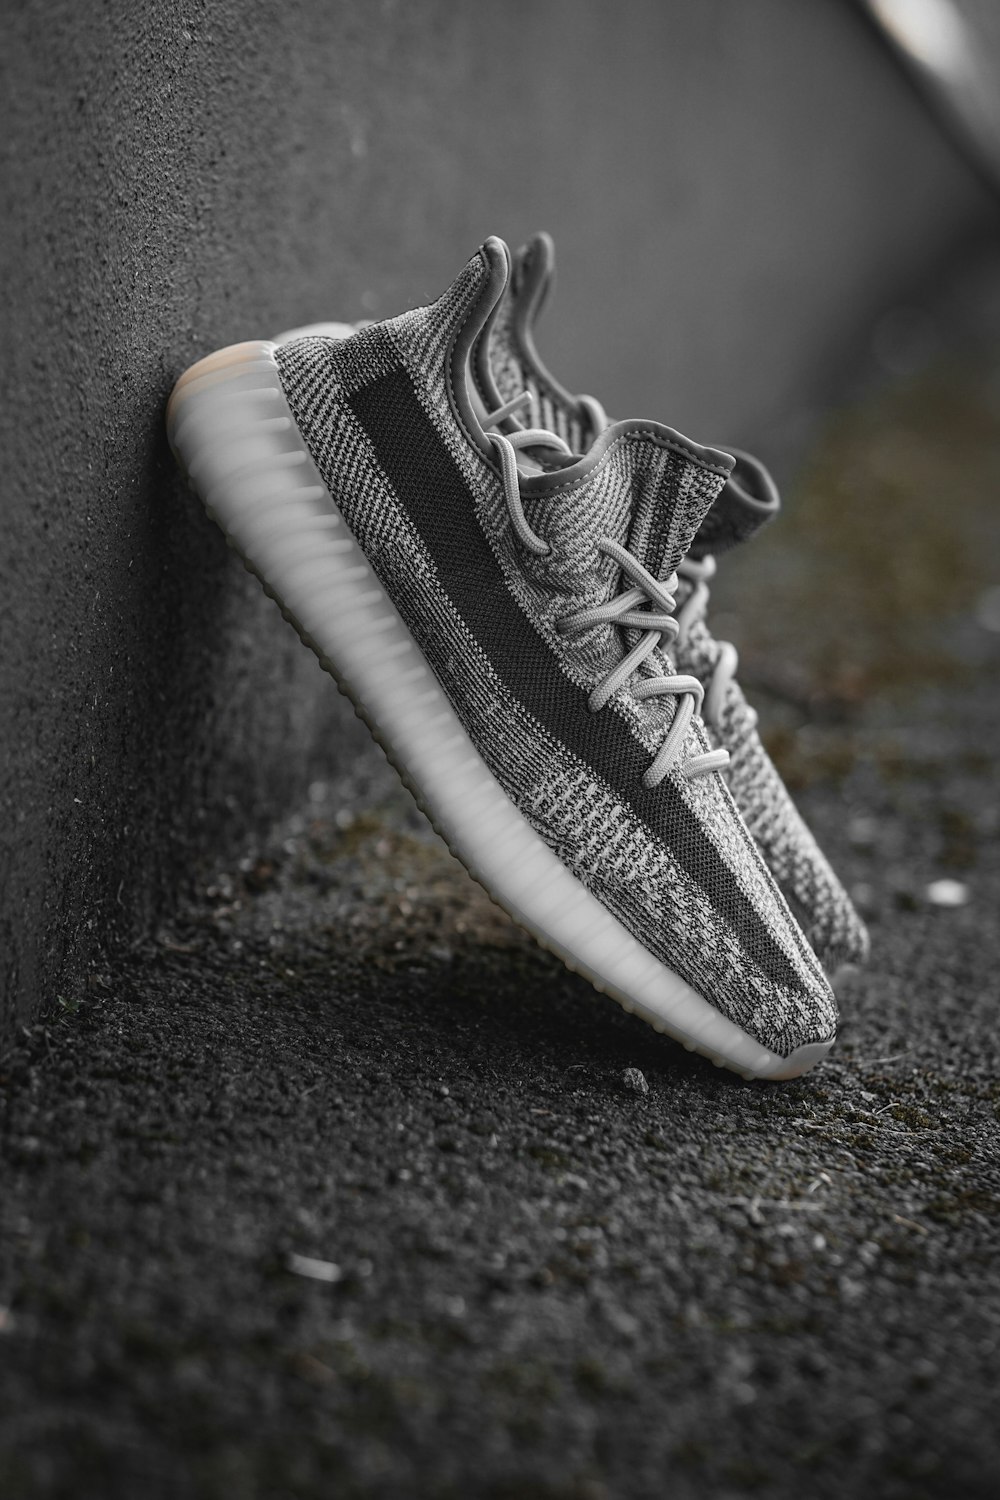 Yeezy 350 Pictures | Download Free Images on Unsplash